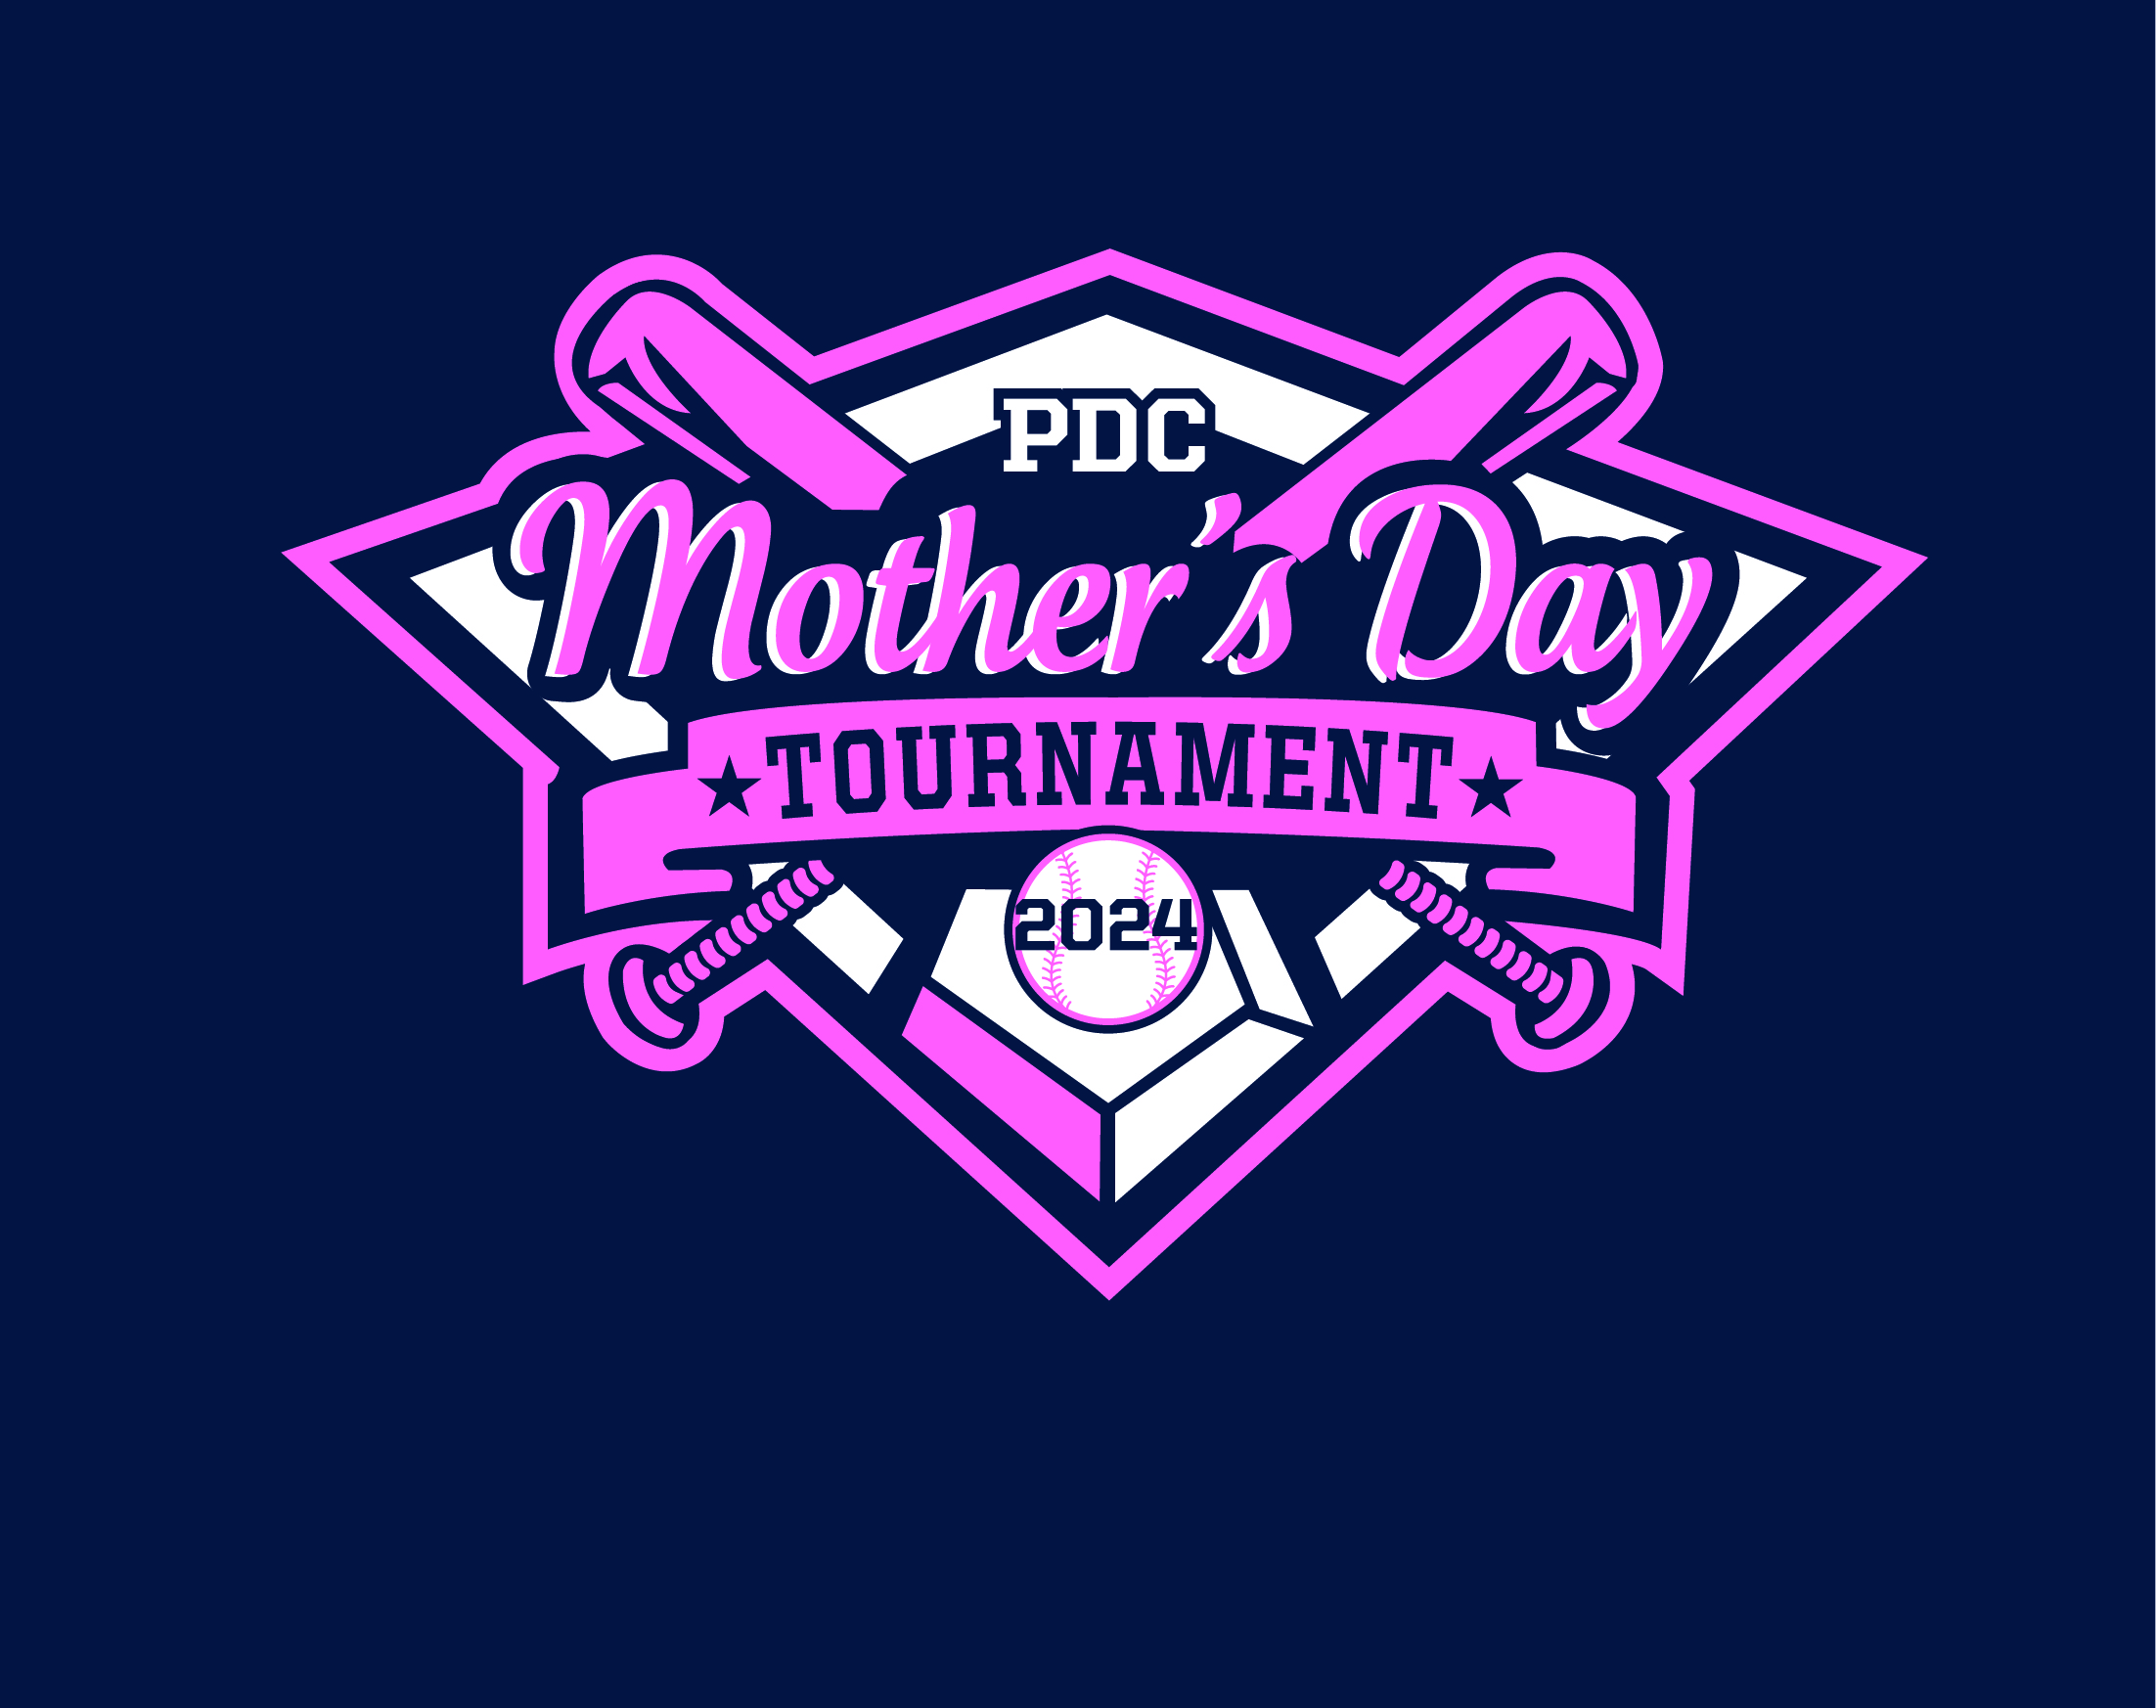 13U MOTHER'S DAY TOURNAMENT